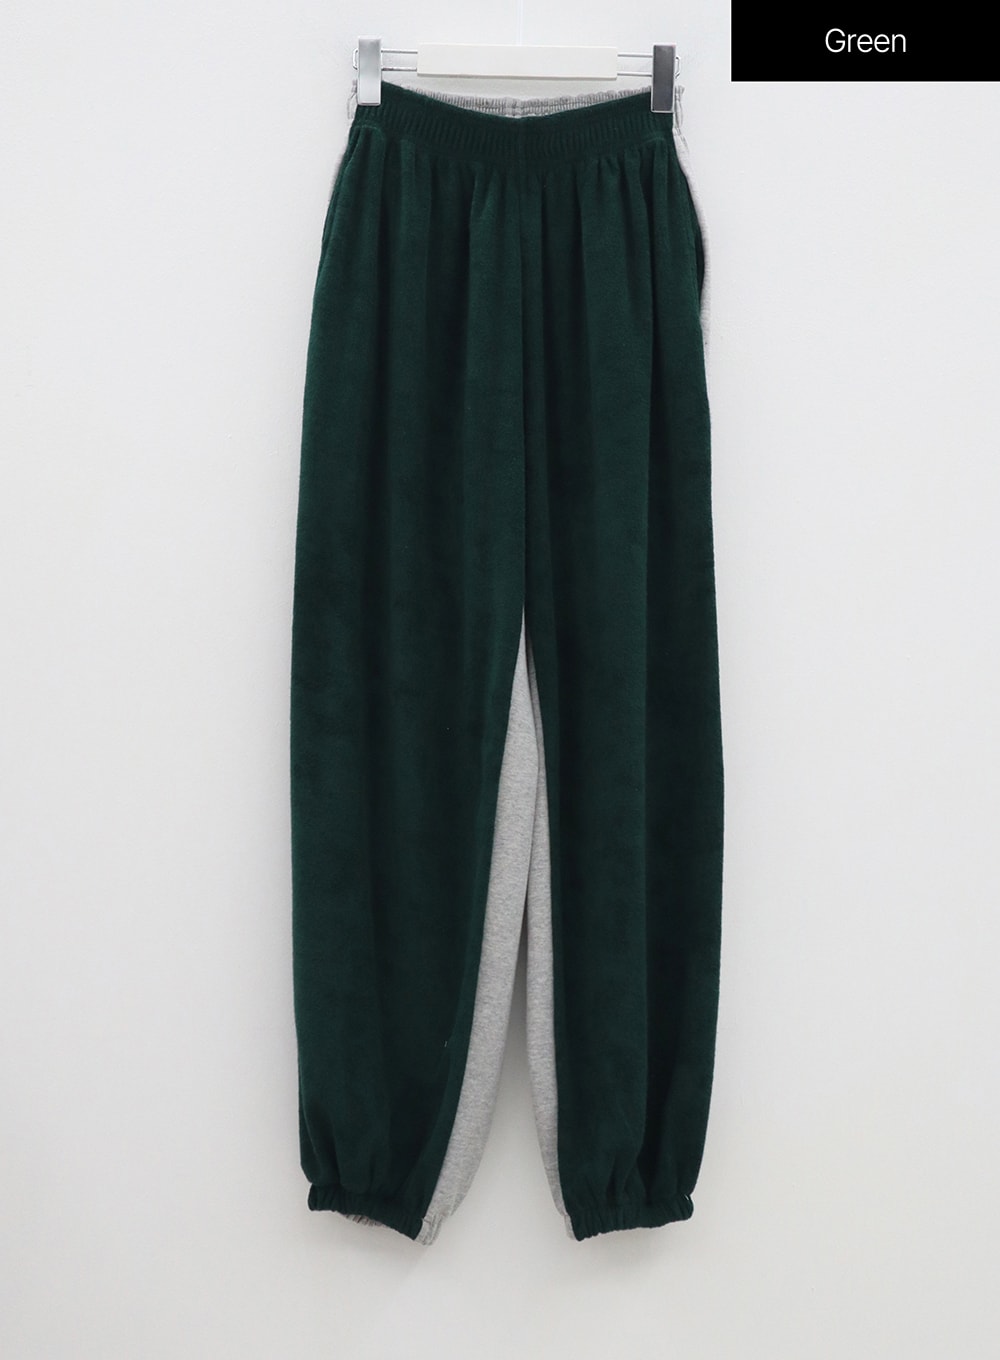 Terry Textured Two Color Sweatpants BM304